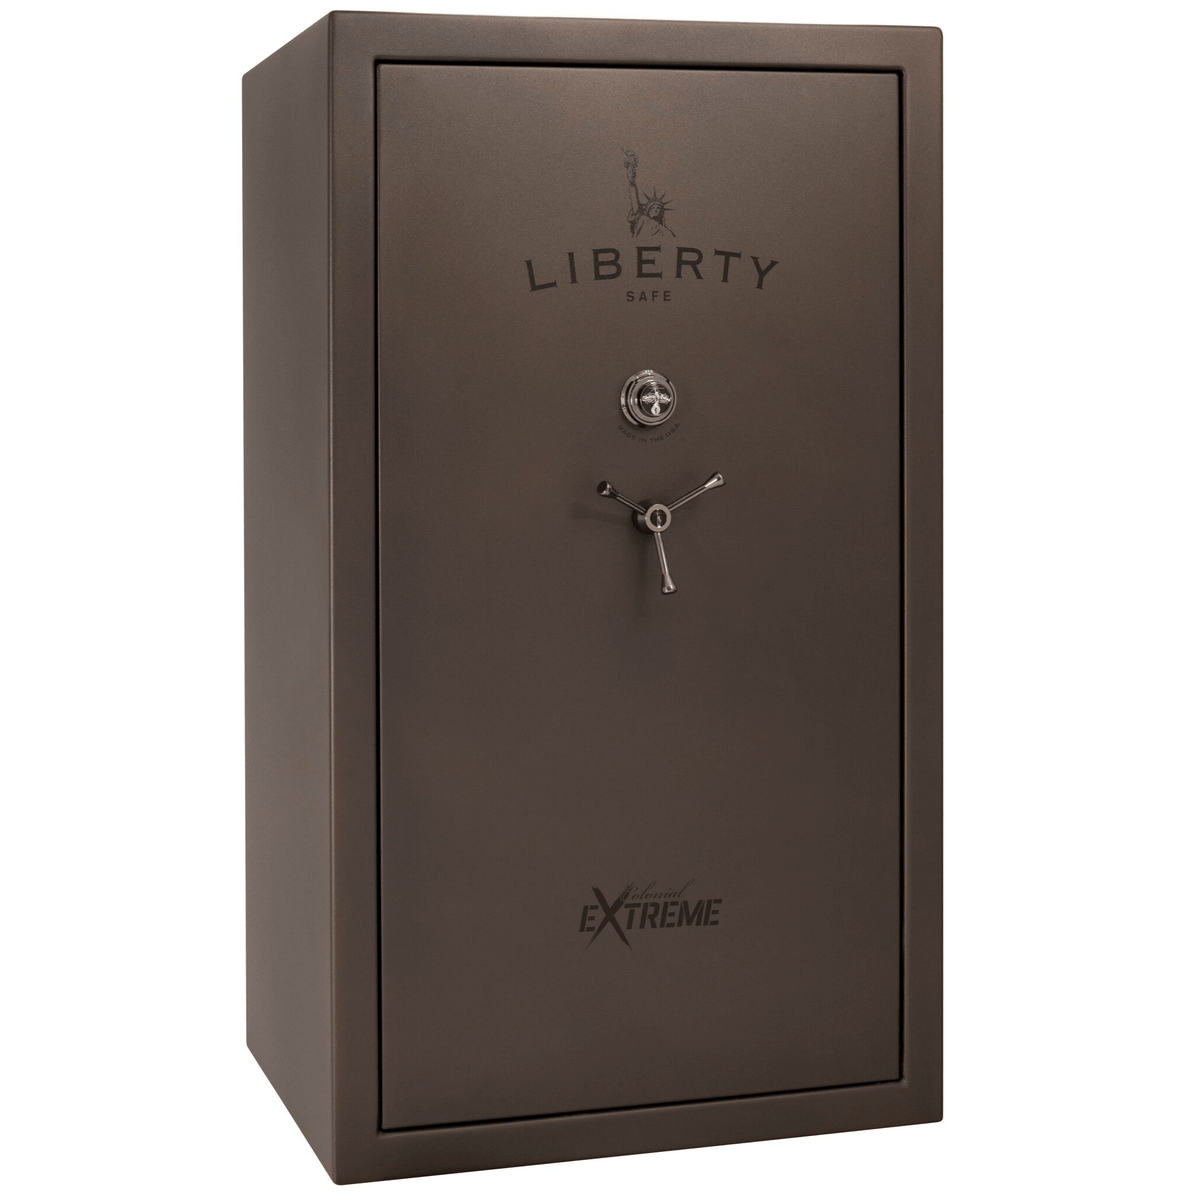 Liberty Colonial 50 Extreme Safe in Textured Bronze with Black Chrome Mechanical Lock.